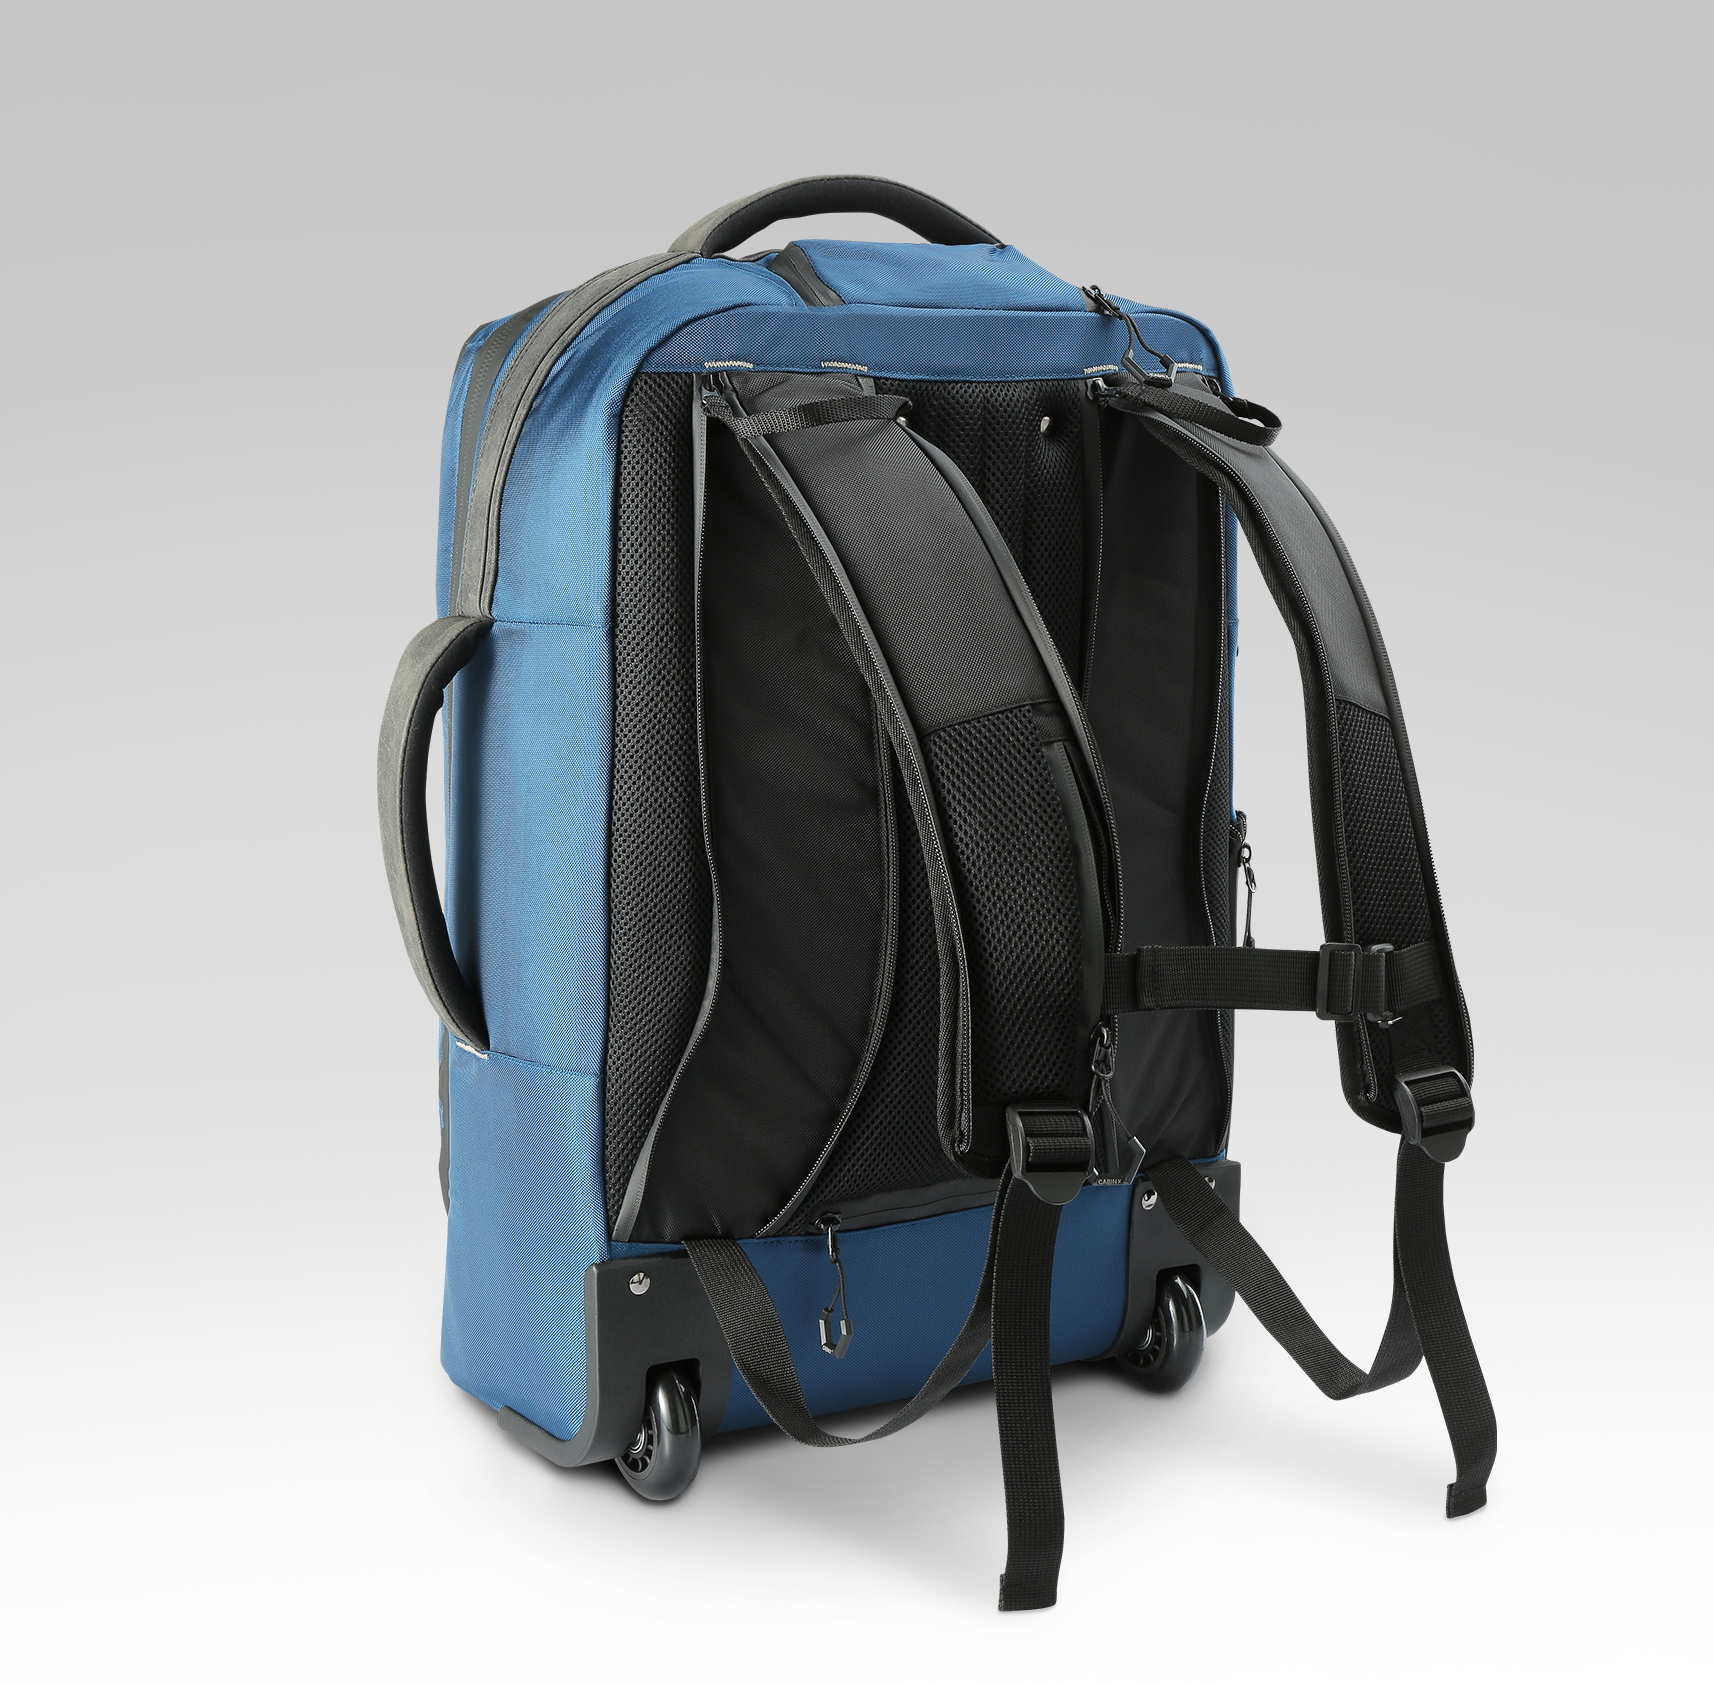 Backpack Mode with World First Zip system